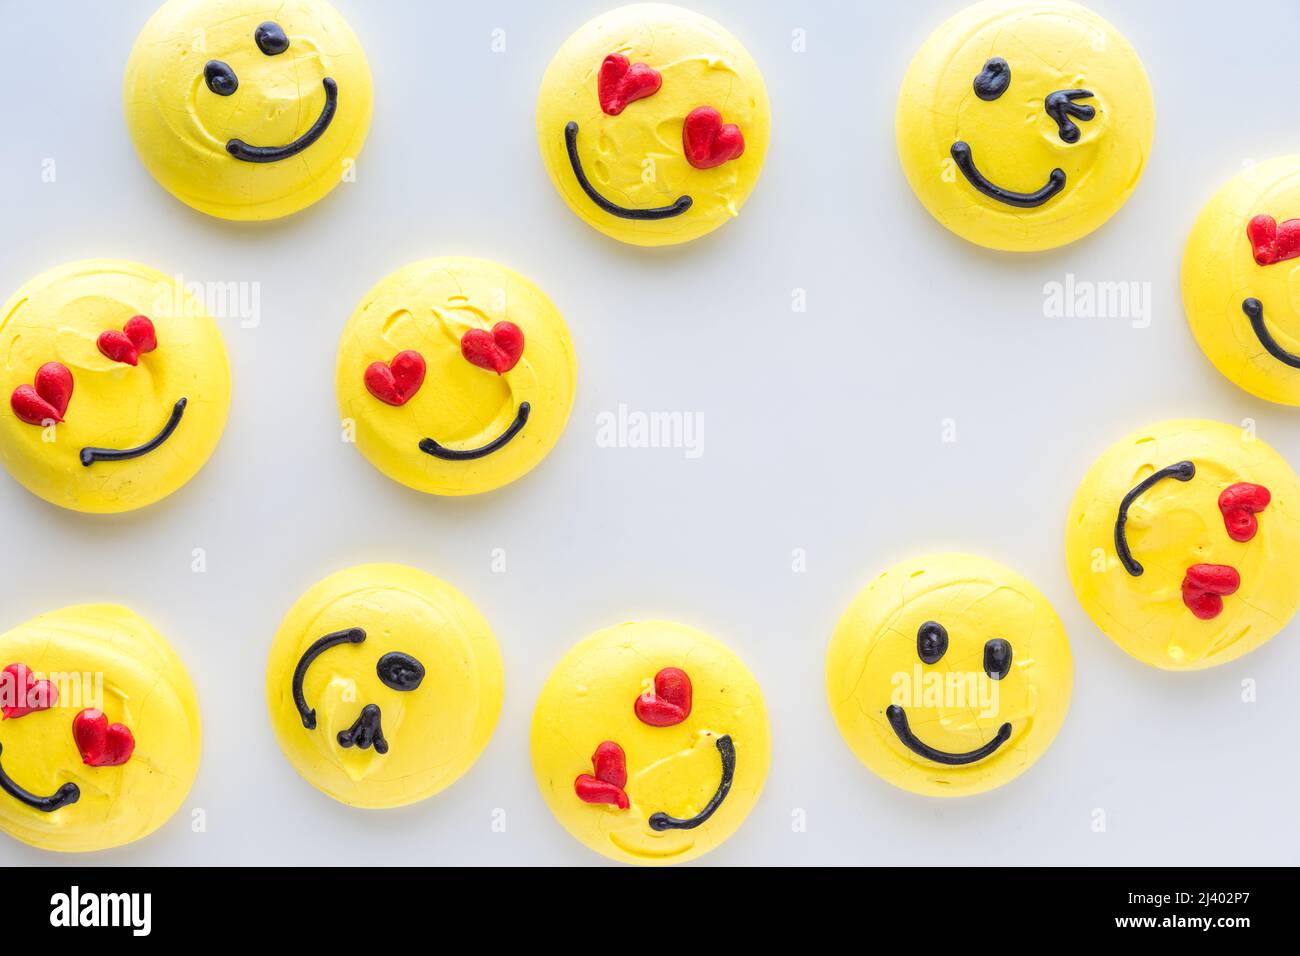 Smiley face emoticon merengue cookies with copy space in the middle. Stock Photo